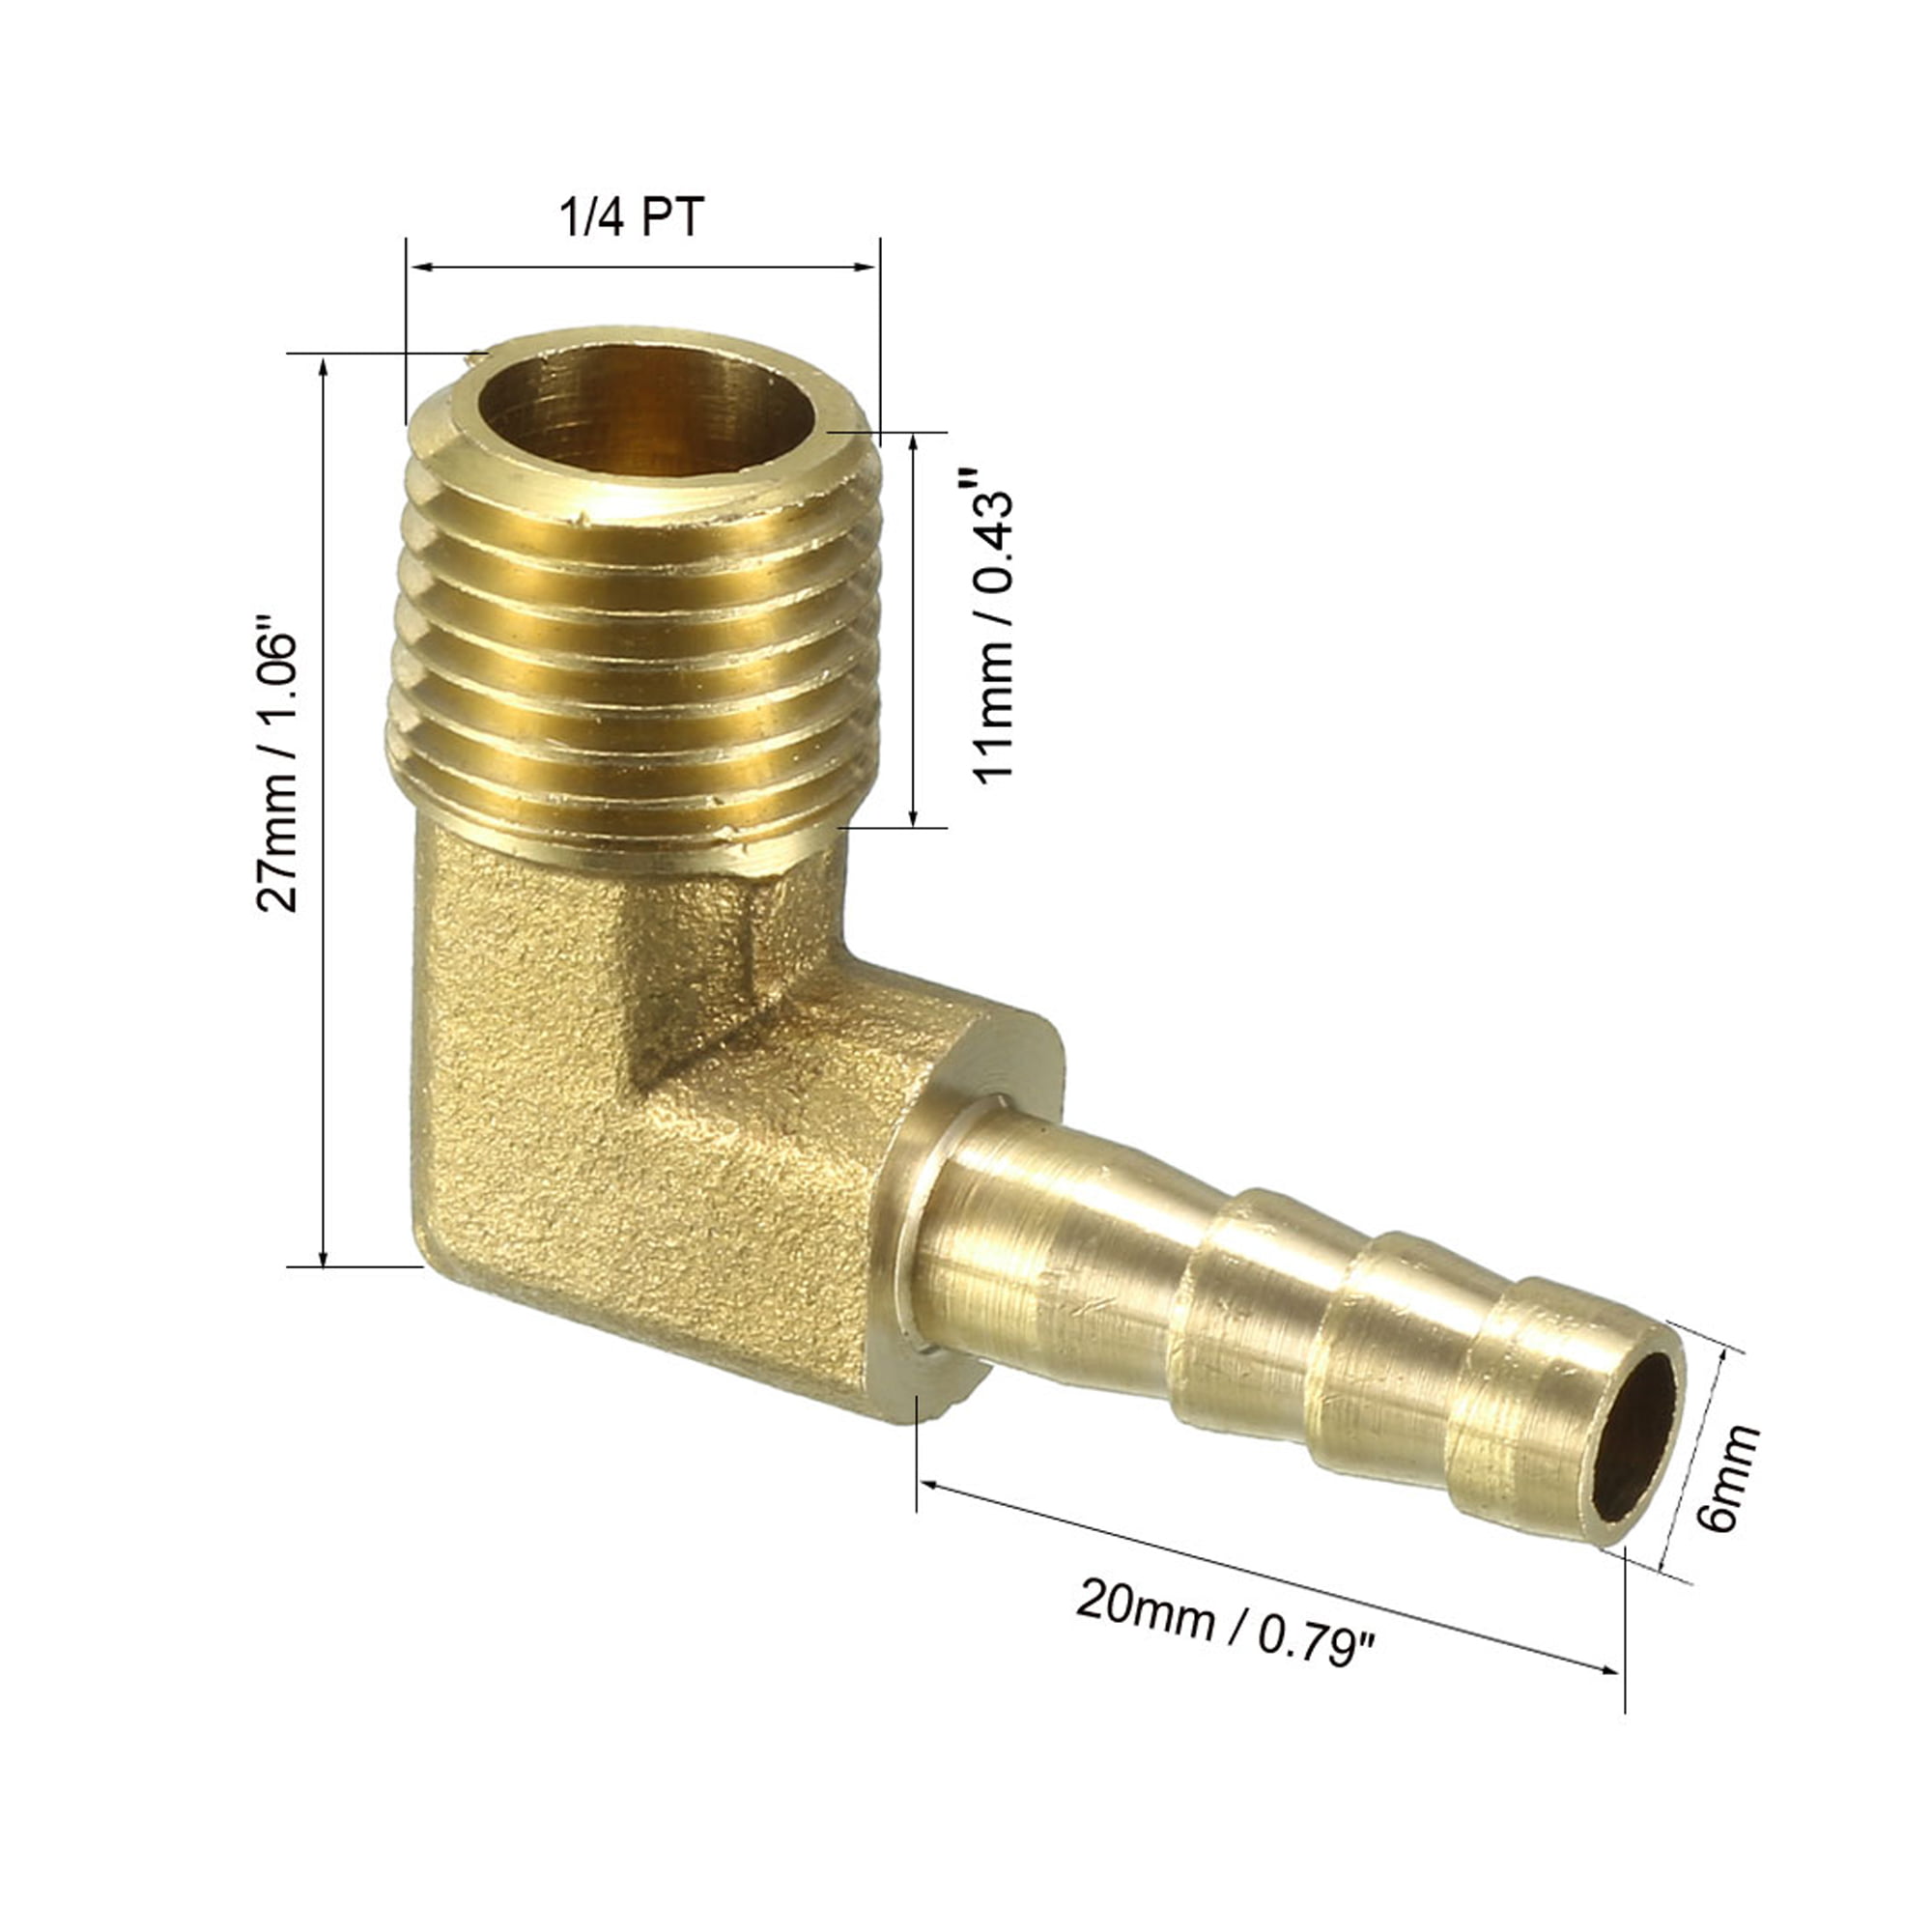 Brass Hose Barb Tee 3/8 Barbed x 3/8 Barbed x 3/8 Barbed T-Fitting Pack of 5, 123-6 